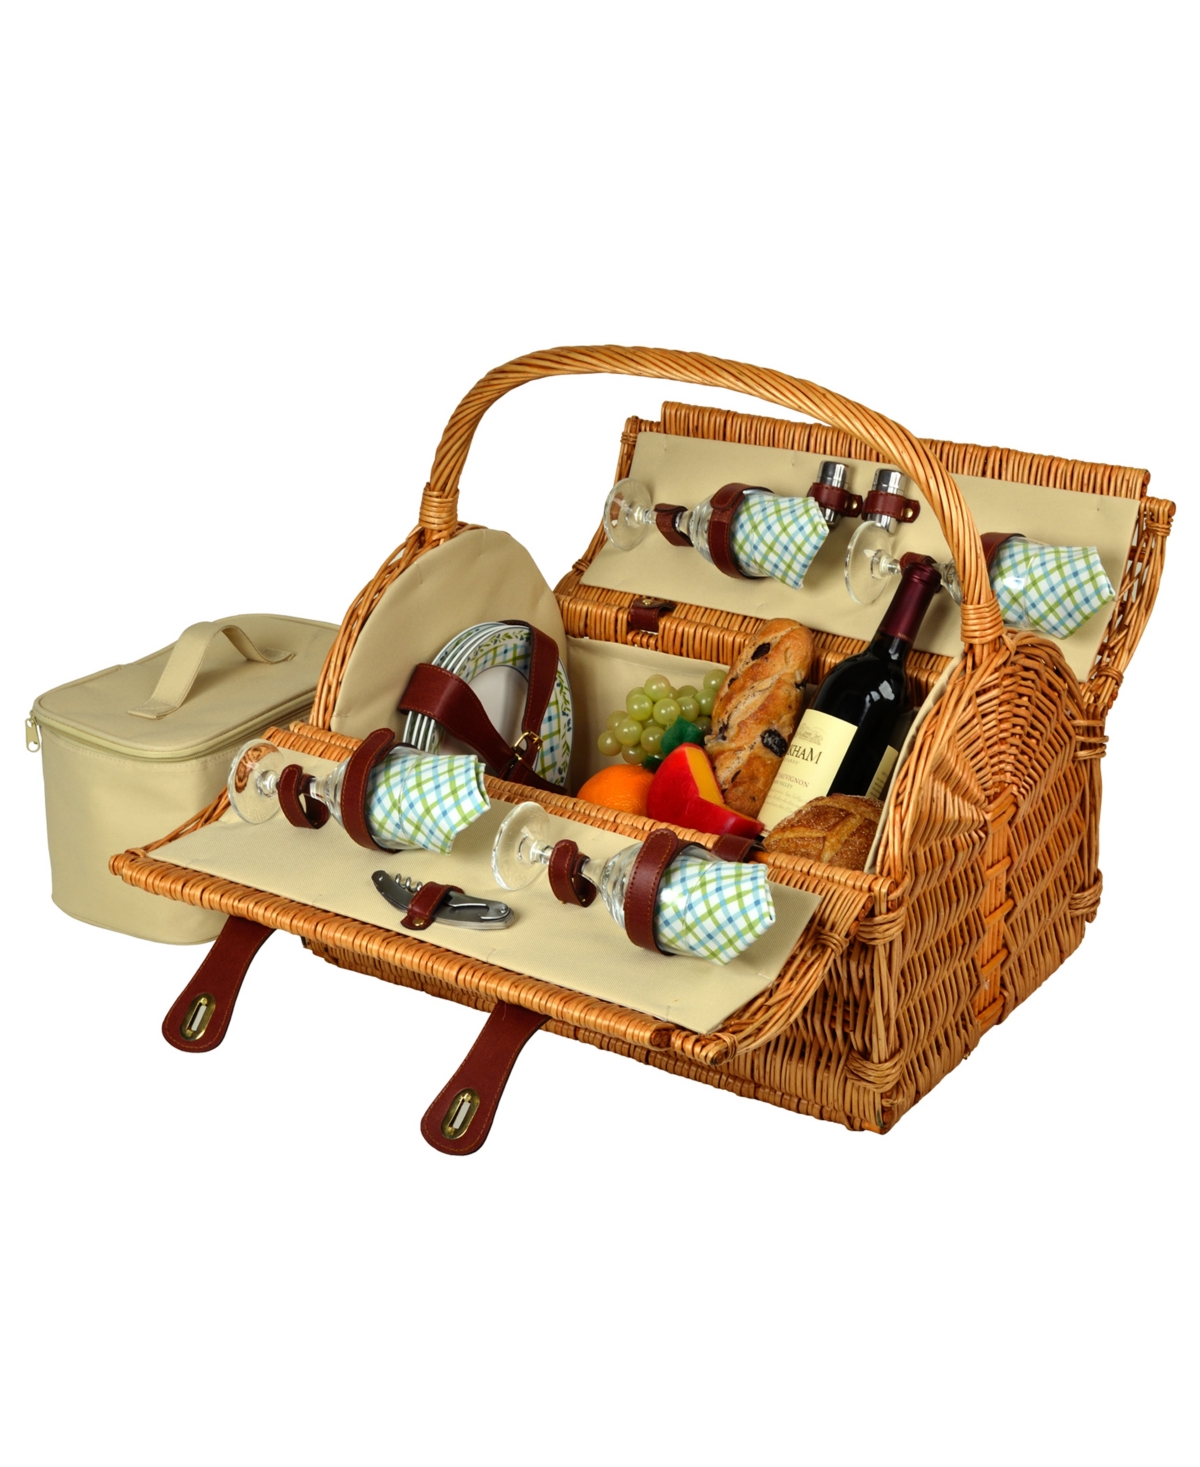 Yorkshire Willow Picnic Basket with Service for 4 - Turquoise